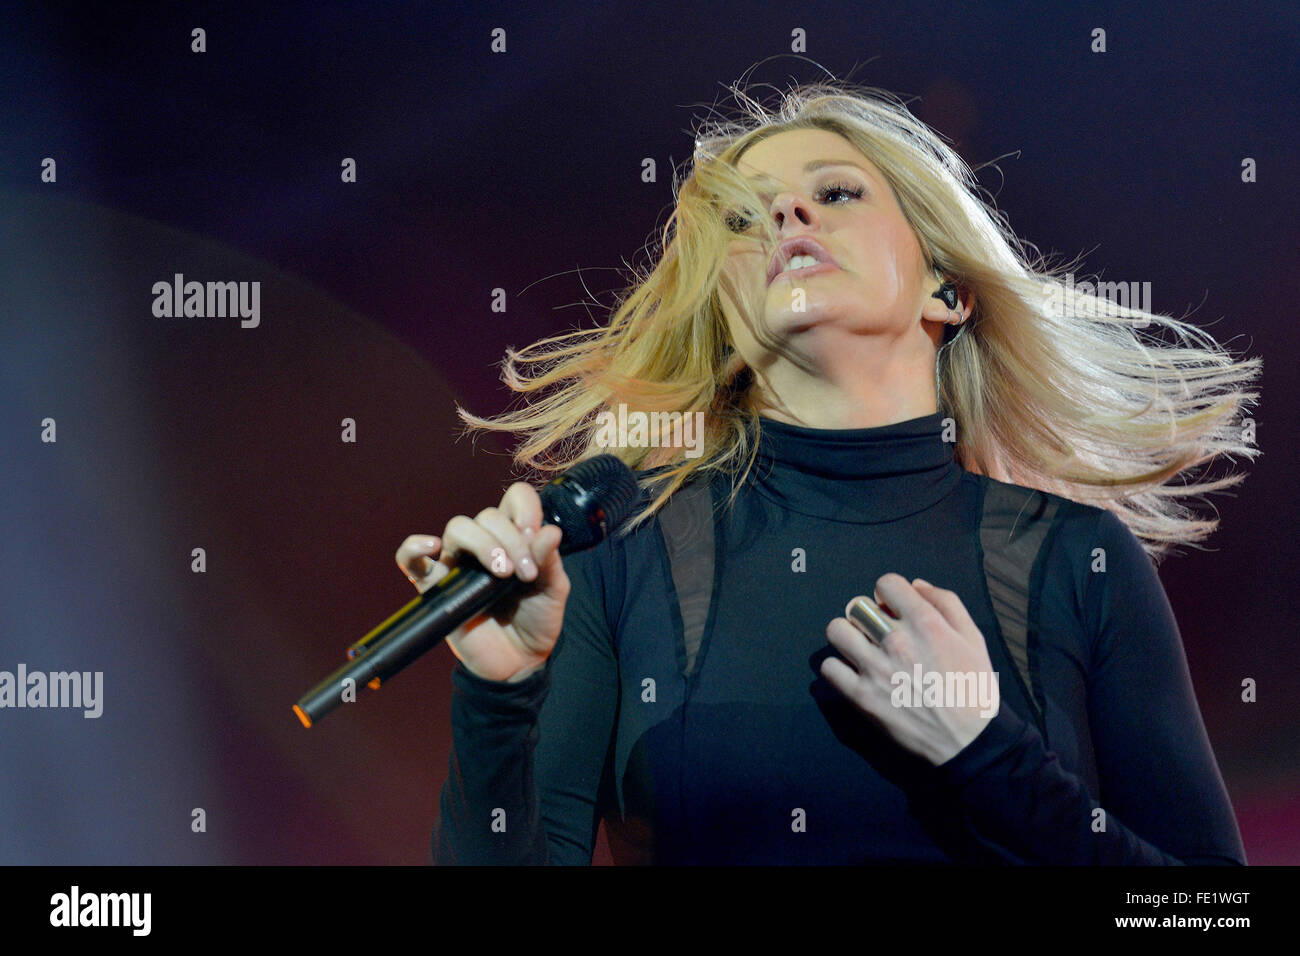 Ellie Goulding Live On Stage On 02 February 2016 At Olympic Hall Munich Bavaria Germany The 